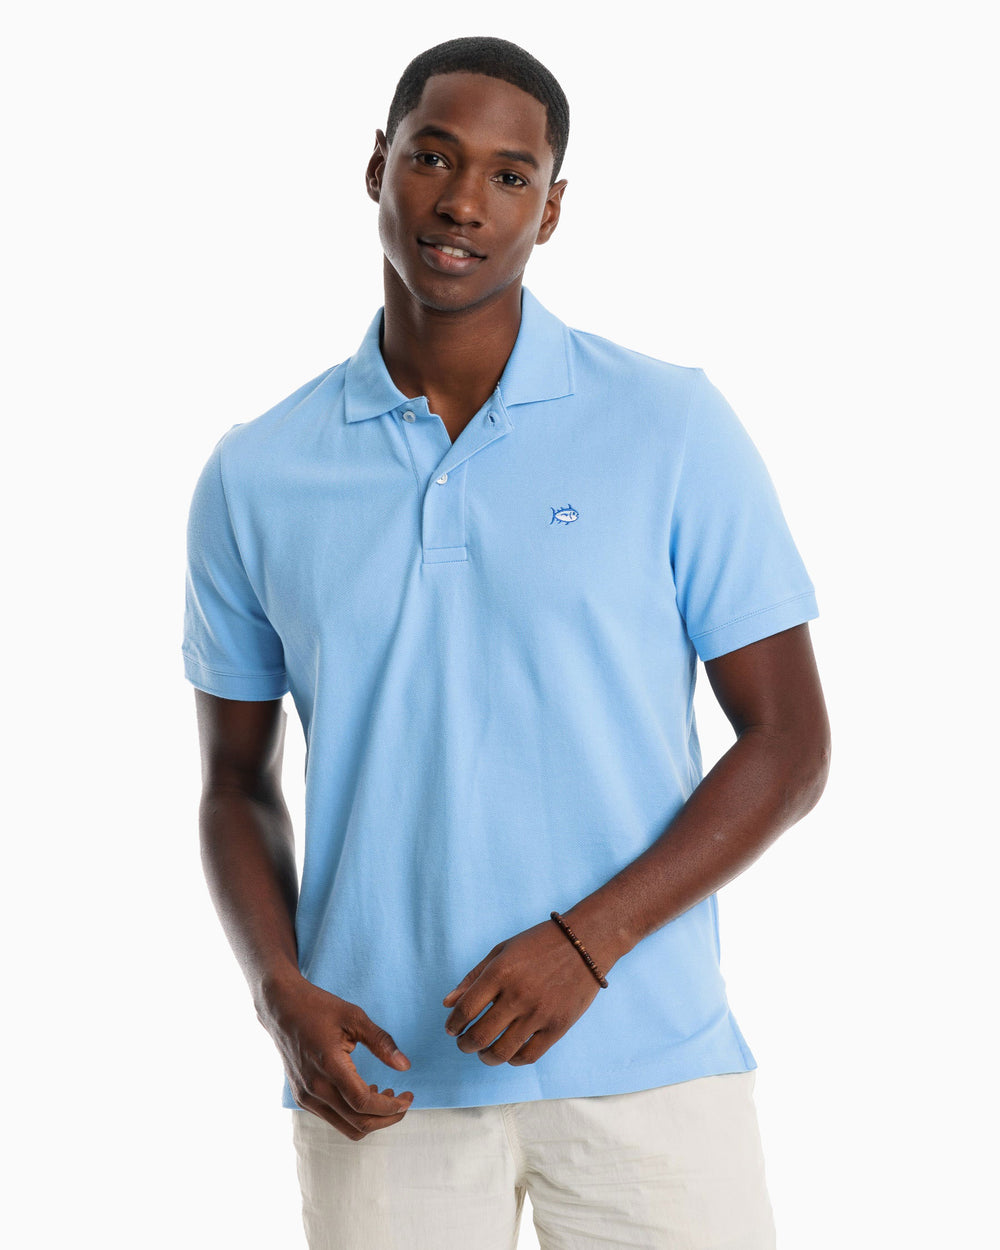 The model front view of the Men's New Skipjack Polo Shirt by Southern Tide - Ocean Channel